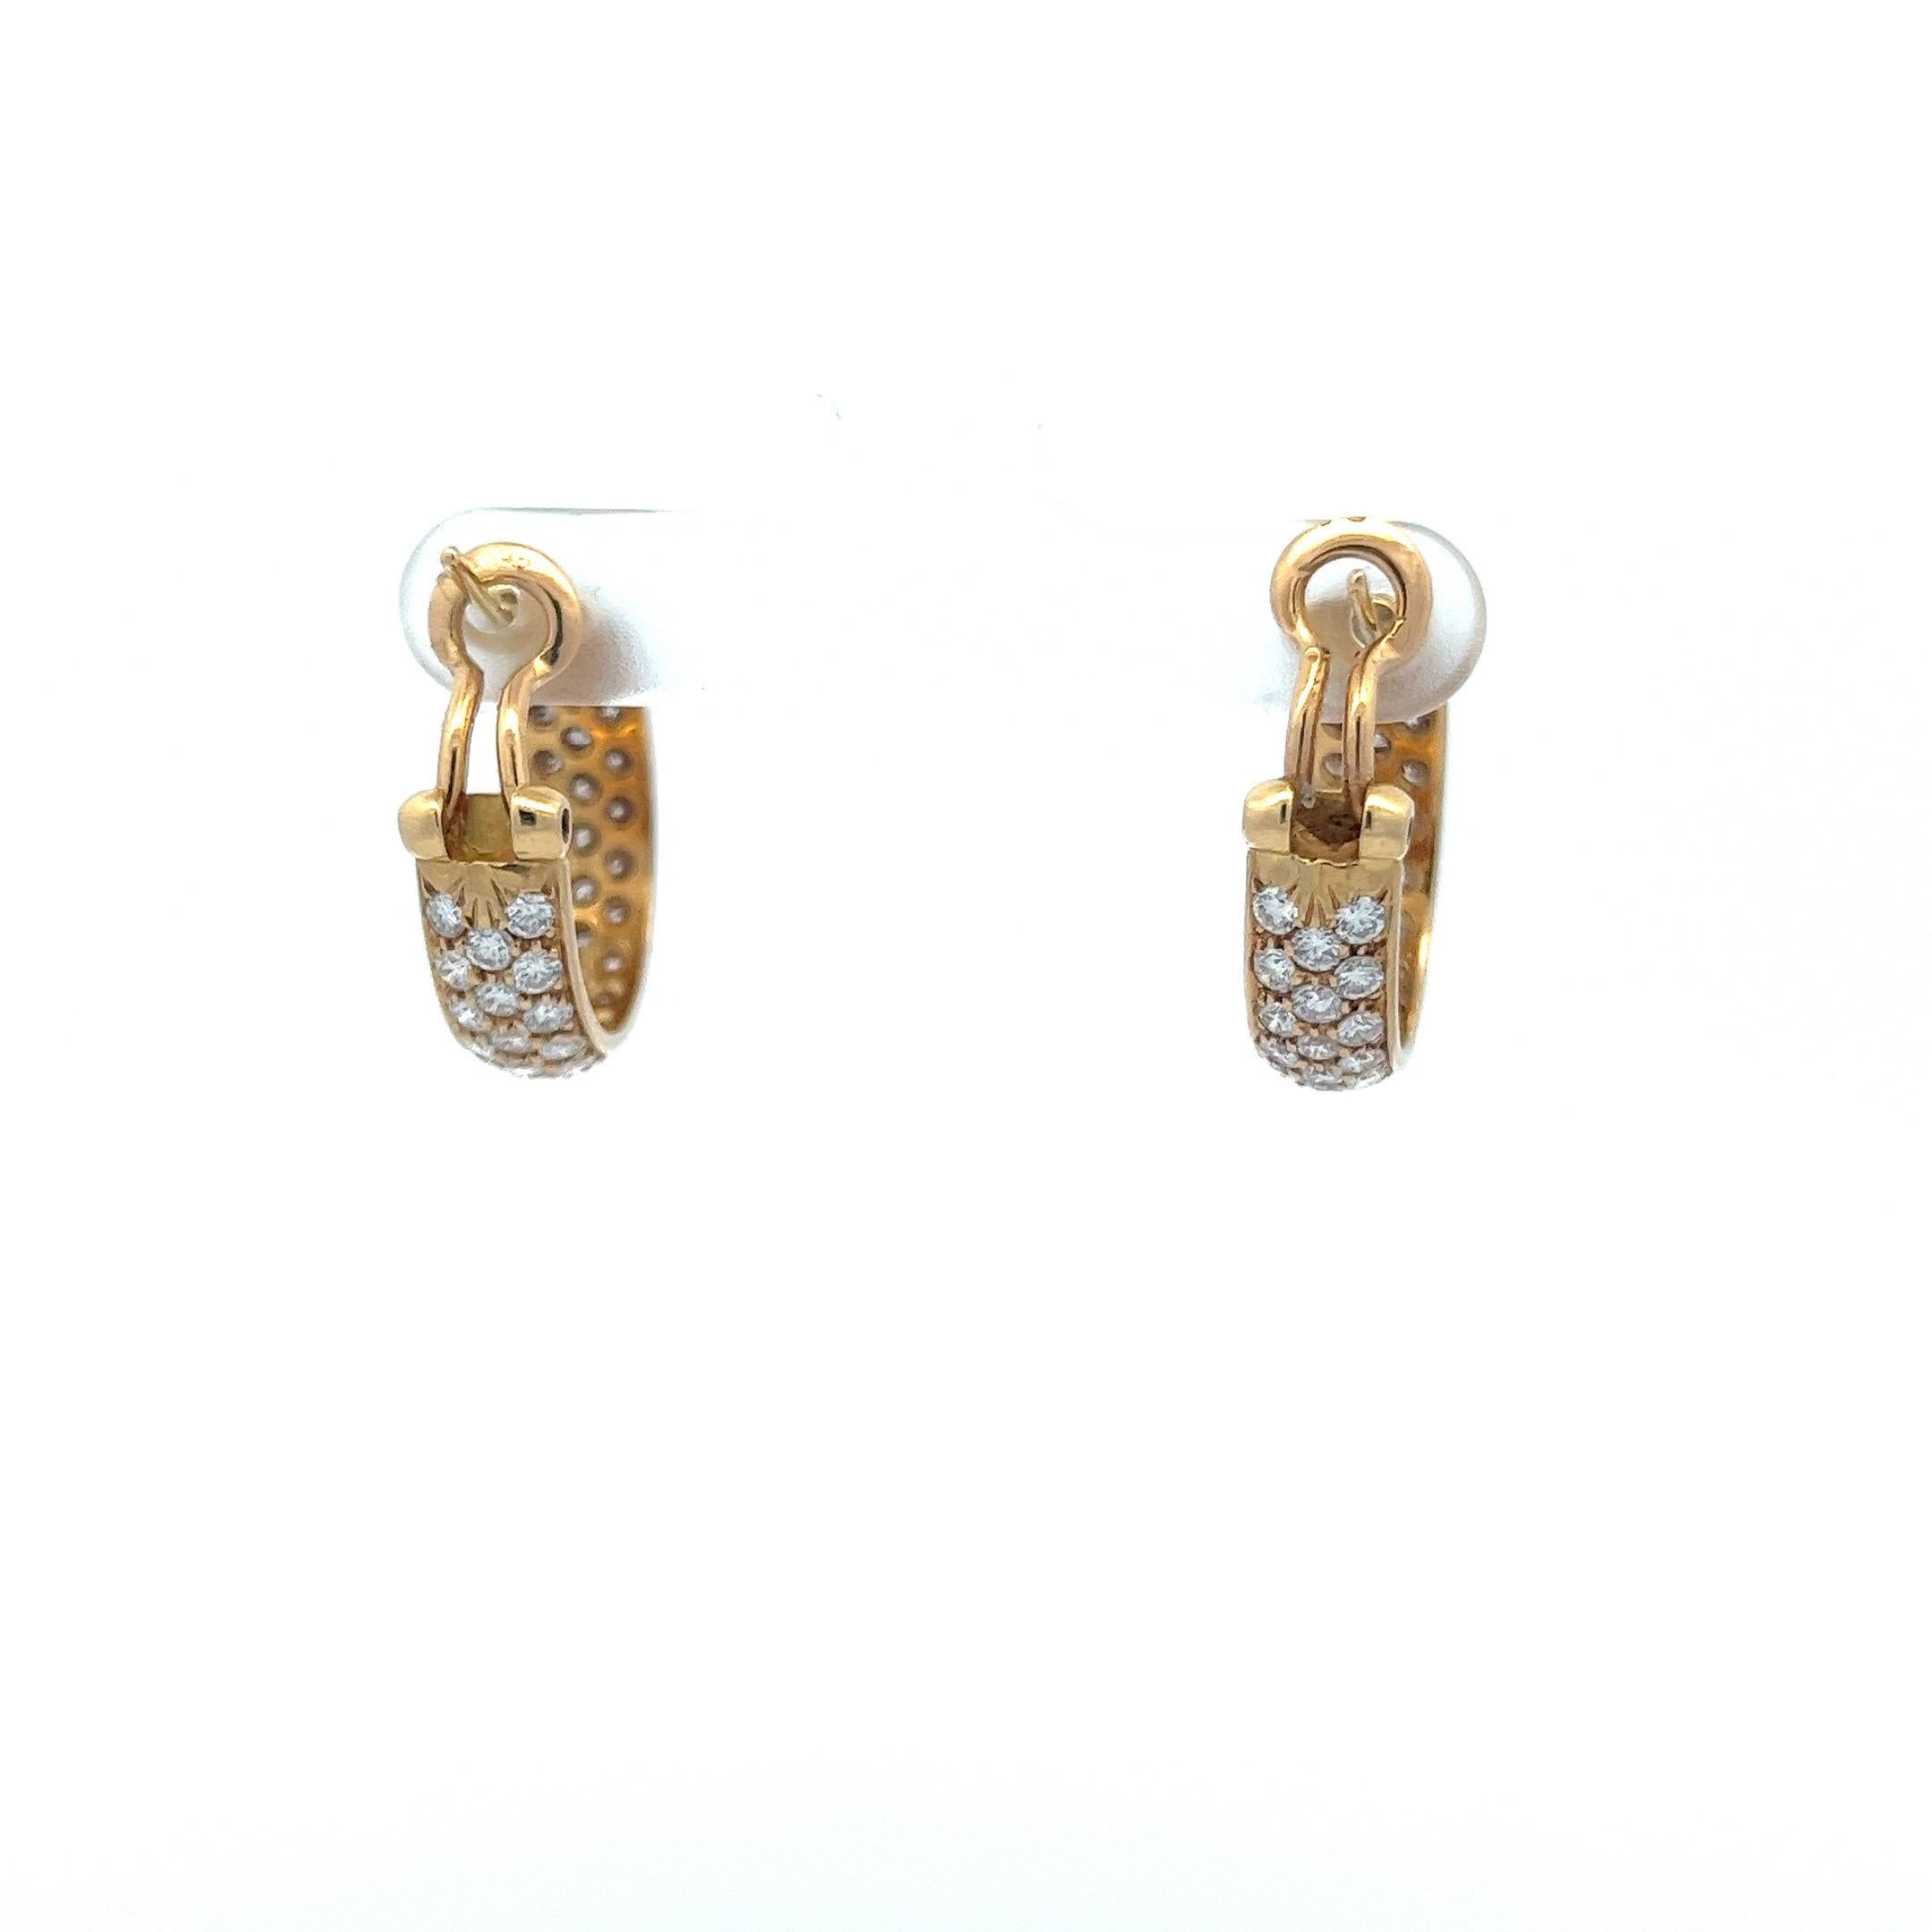 18 Karat Yellow Gold Diamond Pave Hoop Huggie Earrings 4.32 Carats In Good Condition For Sale In Fairfield, CT